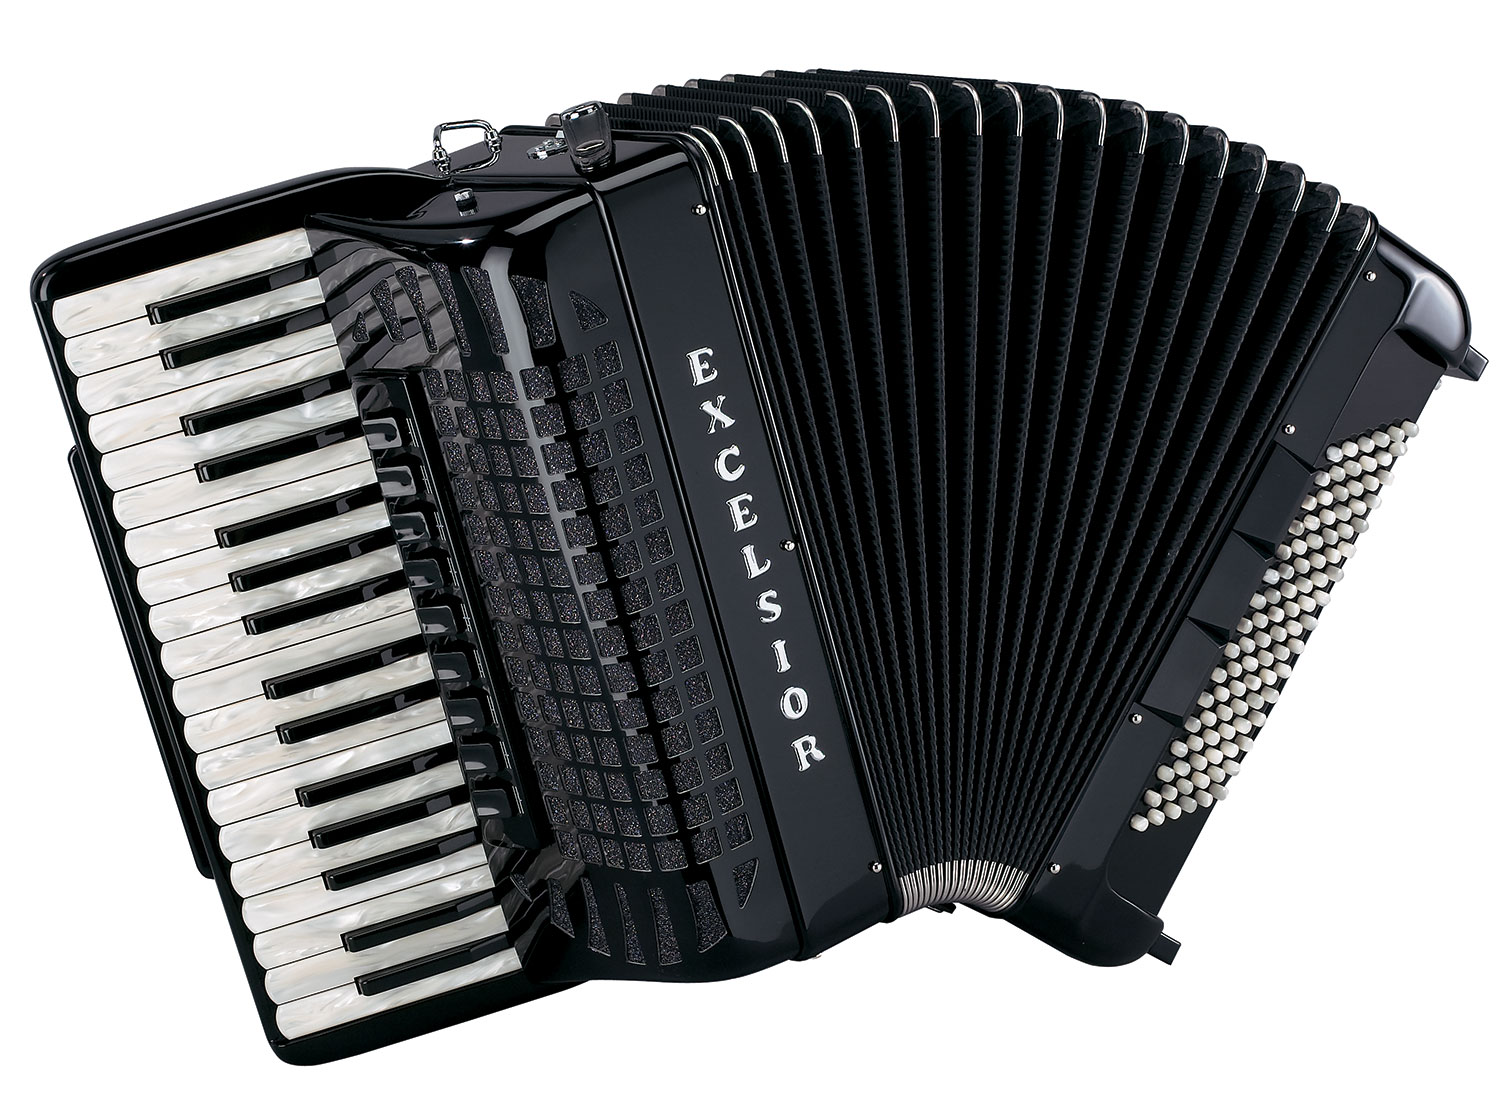 excelsior accordions italy